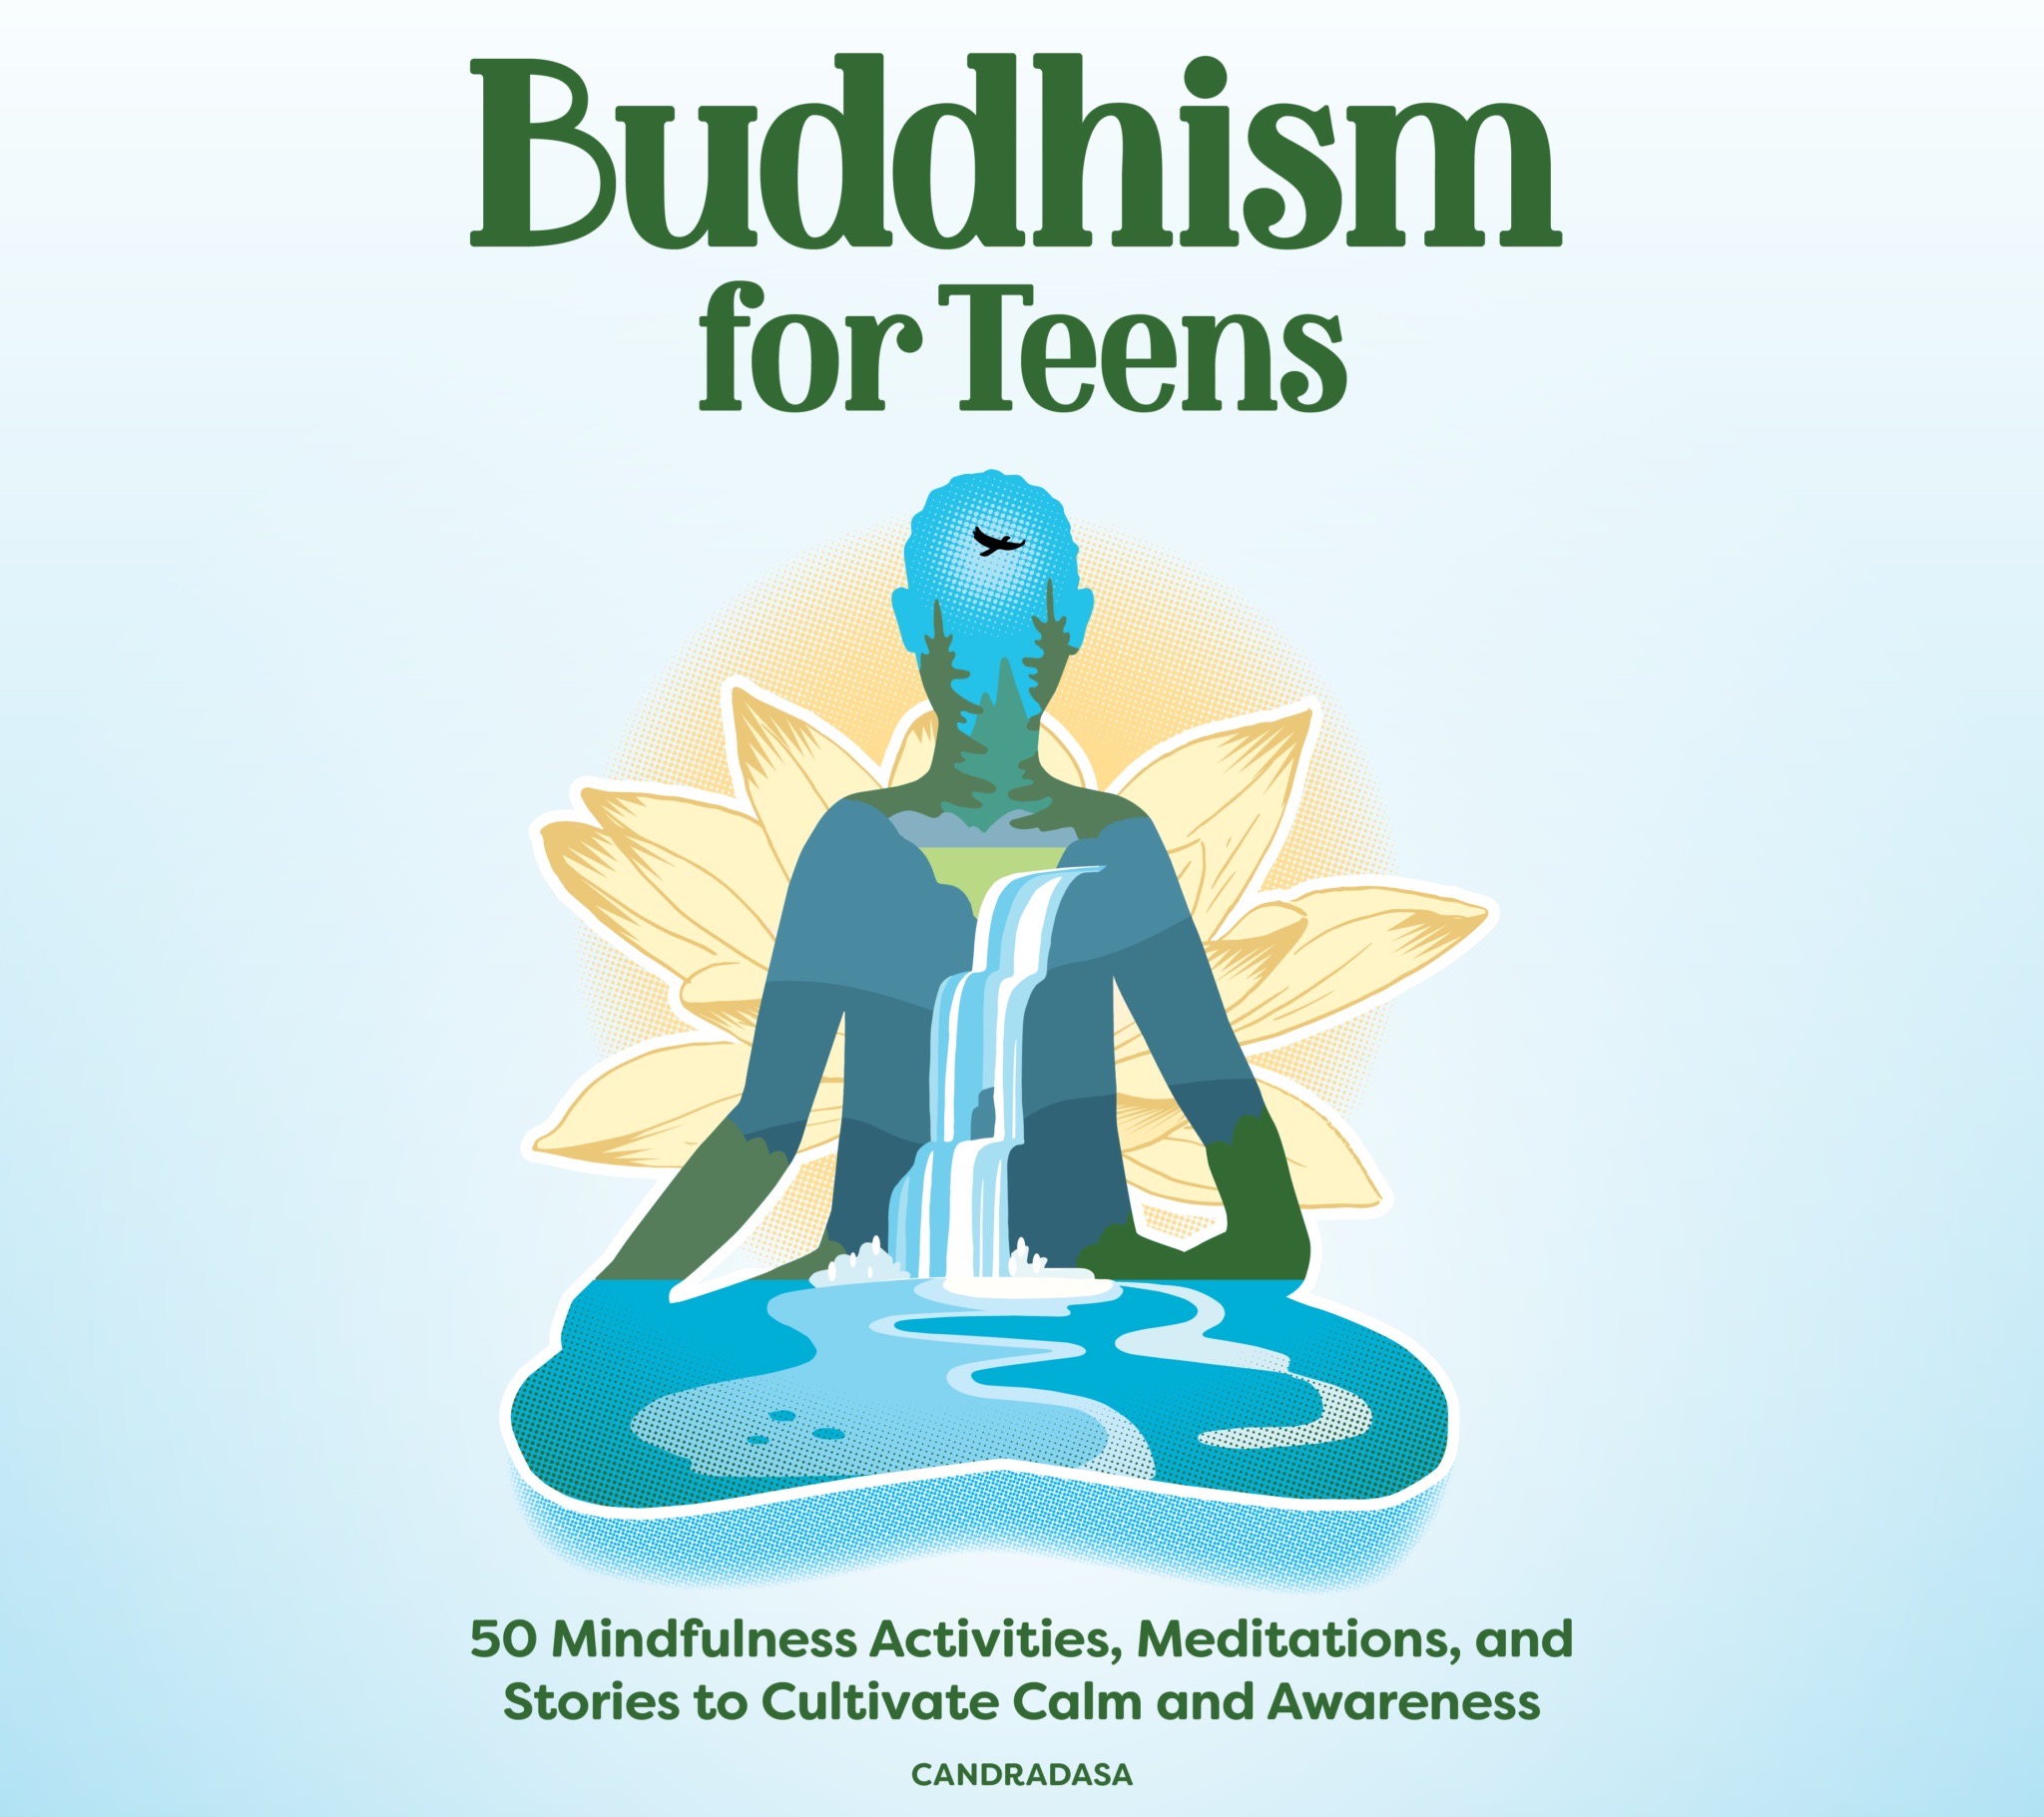 Ladata Buddhism For Teens (The Buddhist Centre Podcast, Episode 424)